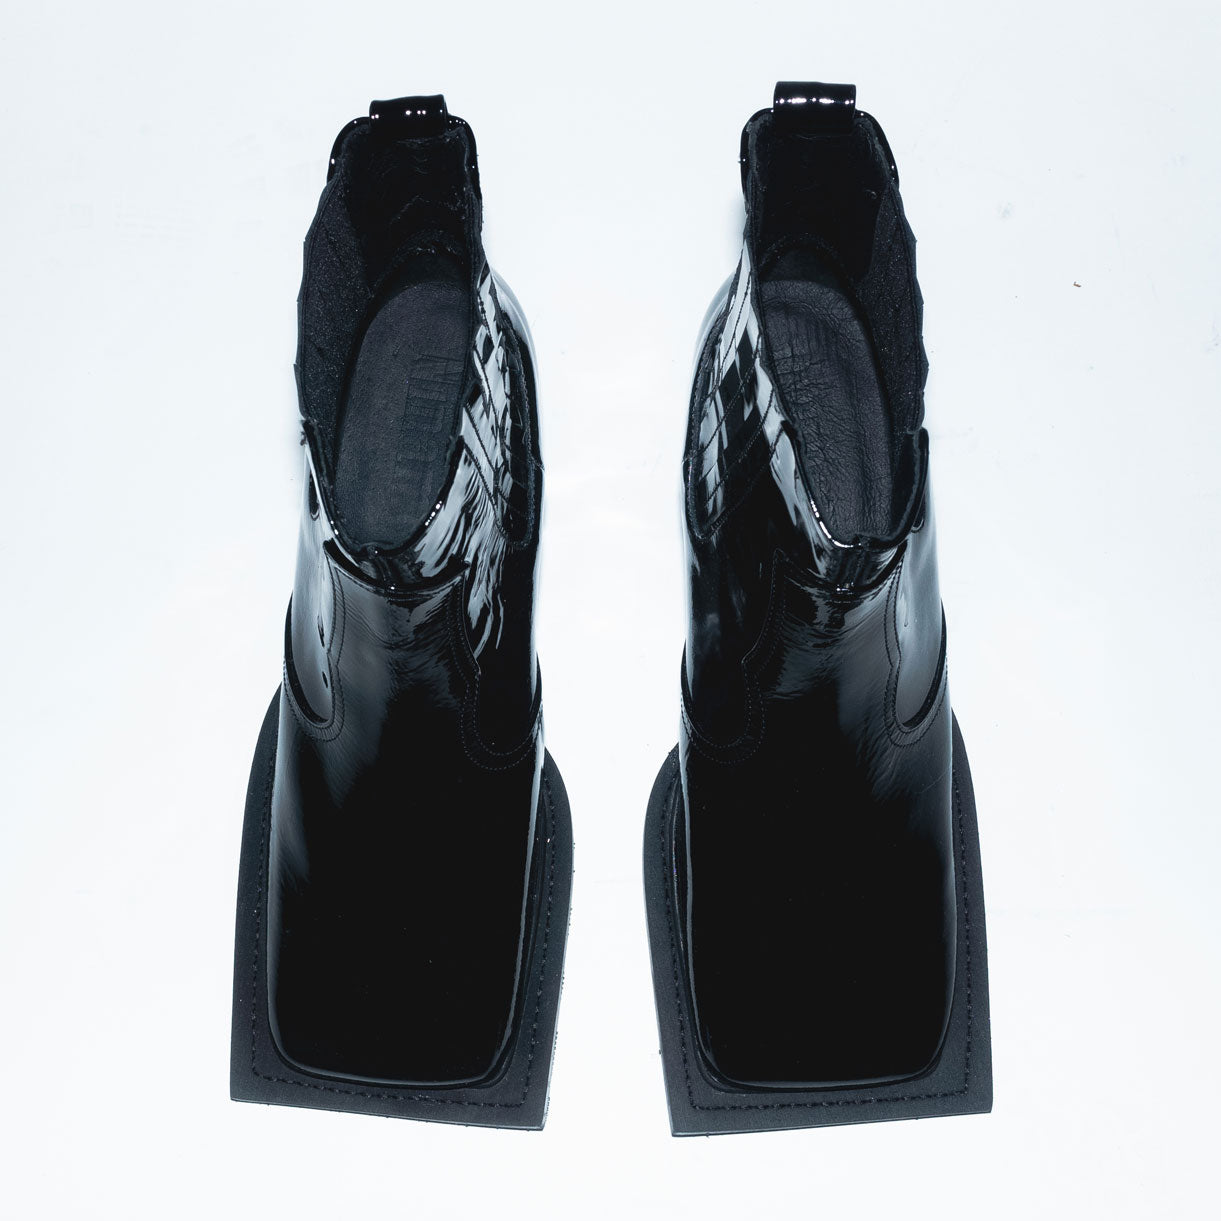 Runway Howler Ankle Boots in Black Patent Leather